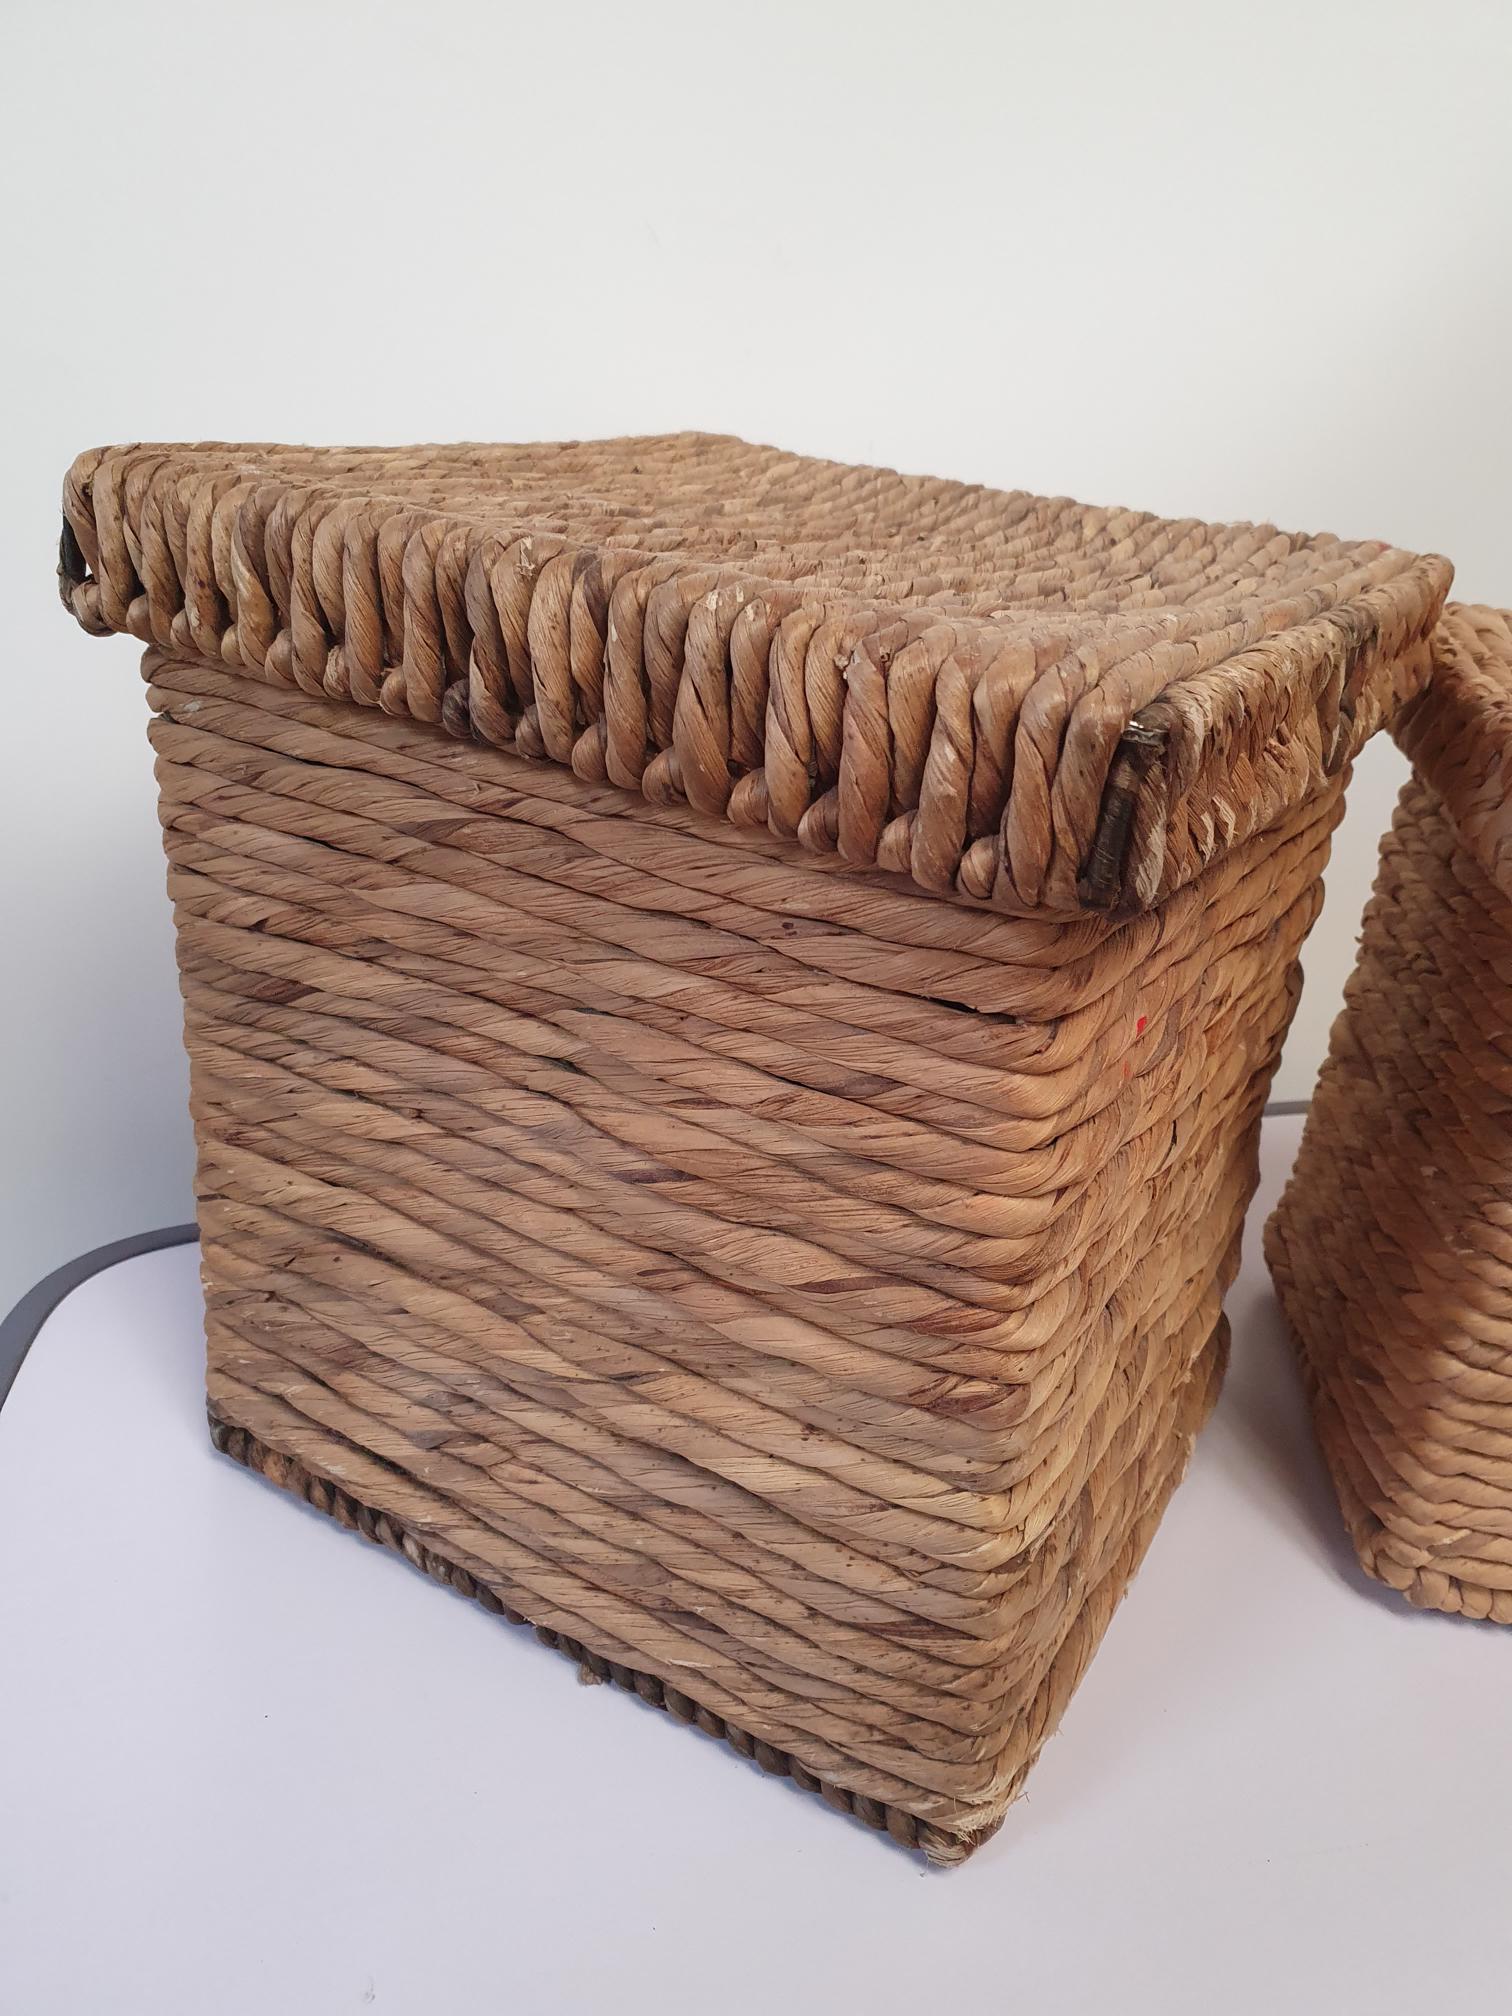 Wicker Pair Baskets - Image 2 of 6